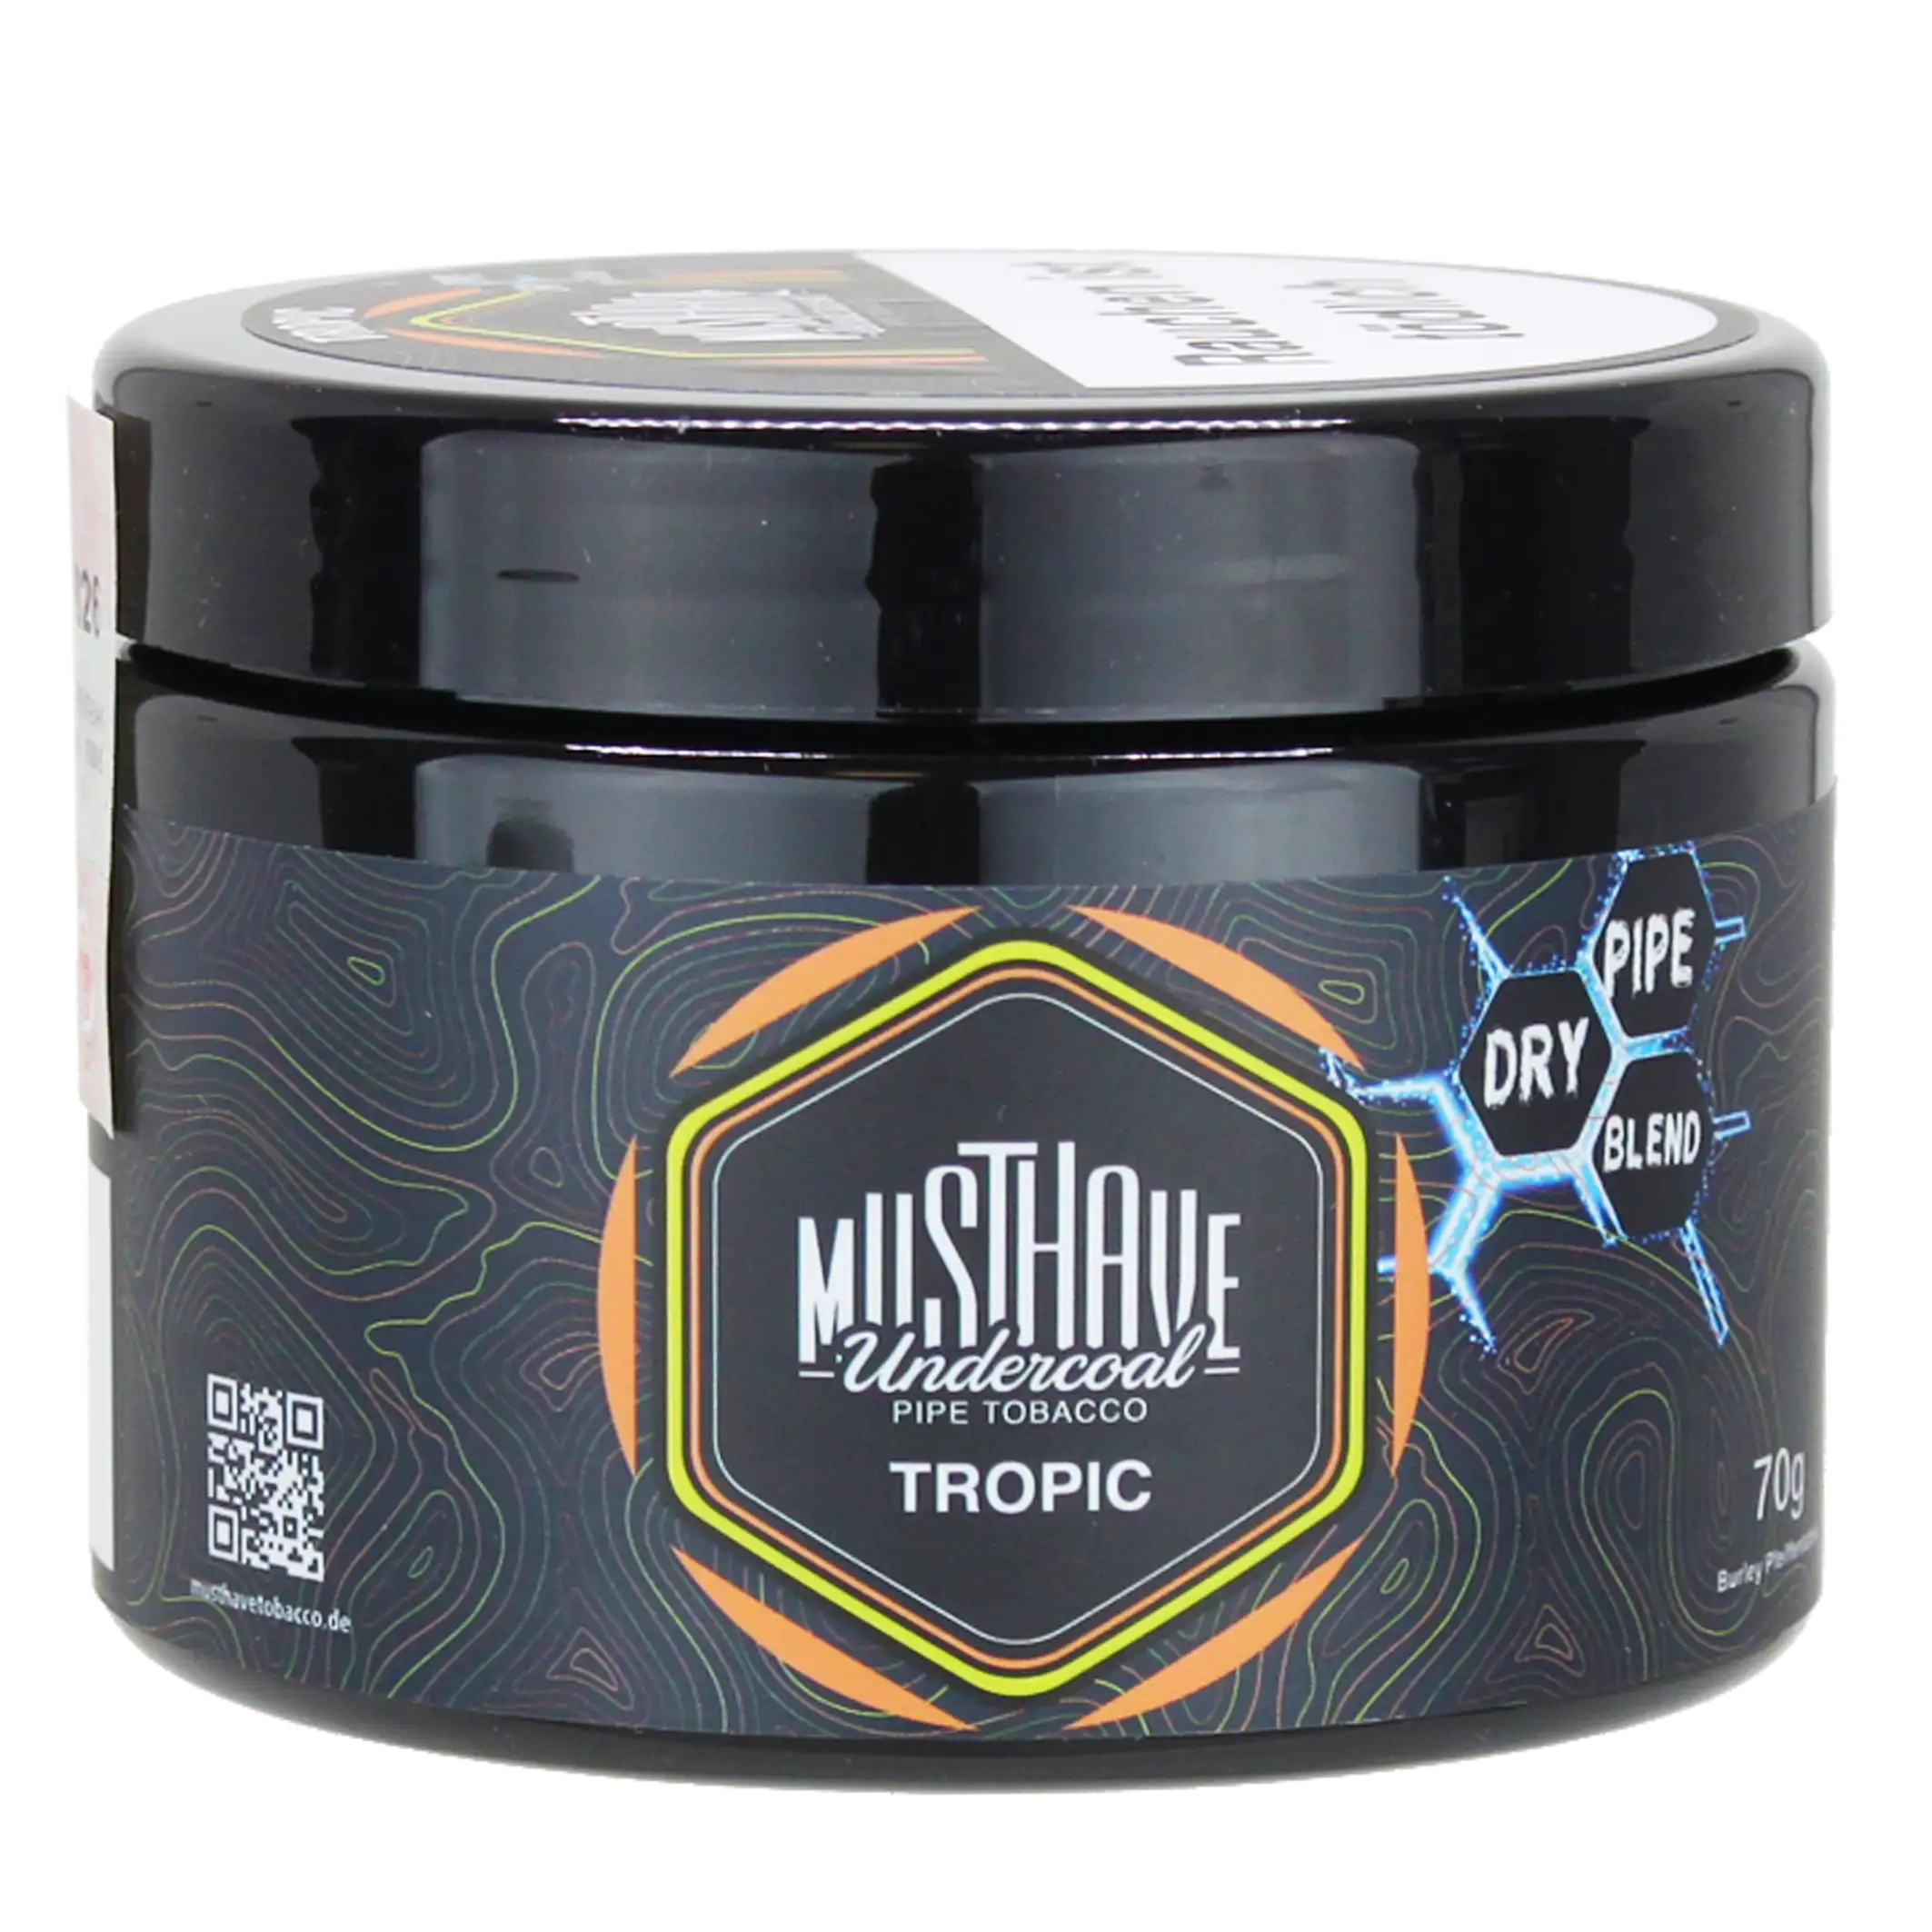 Musthave Dry Base Tabak Tropic 70g